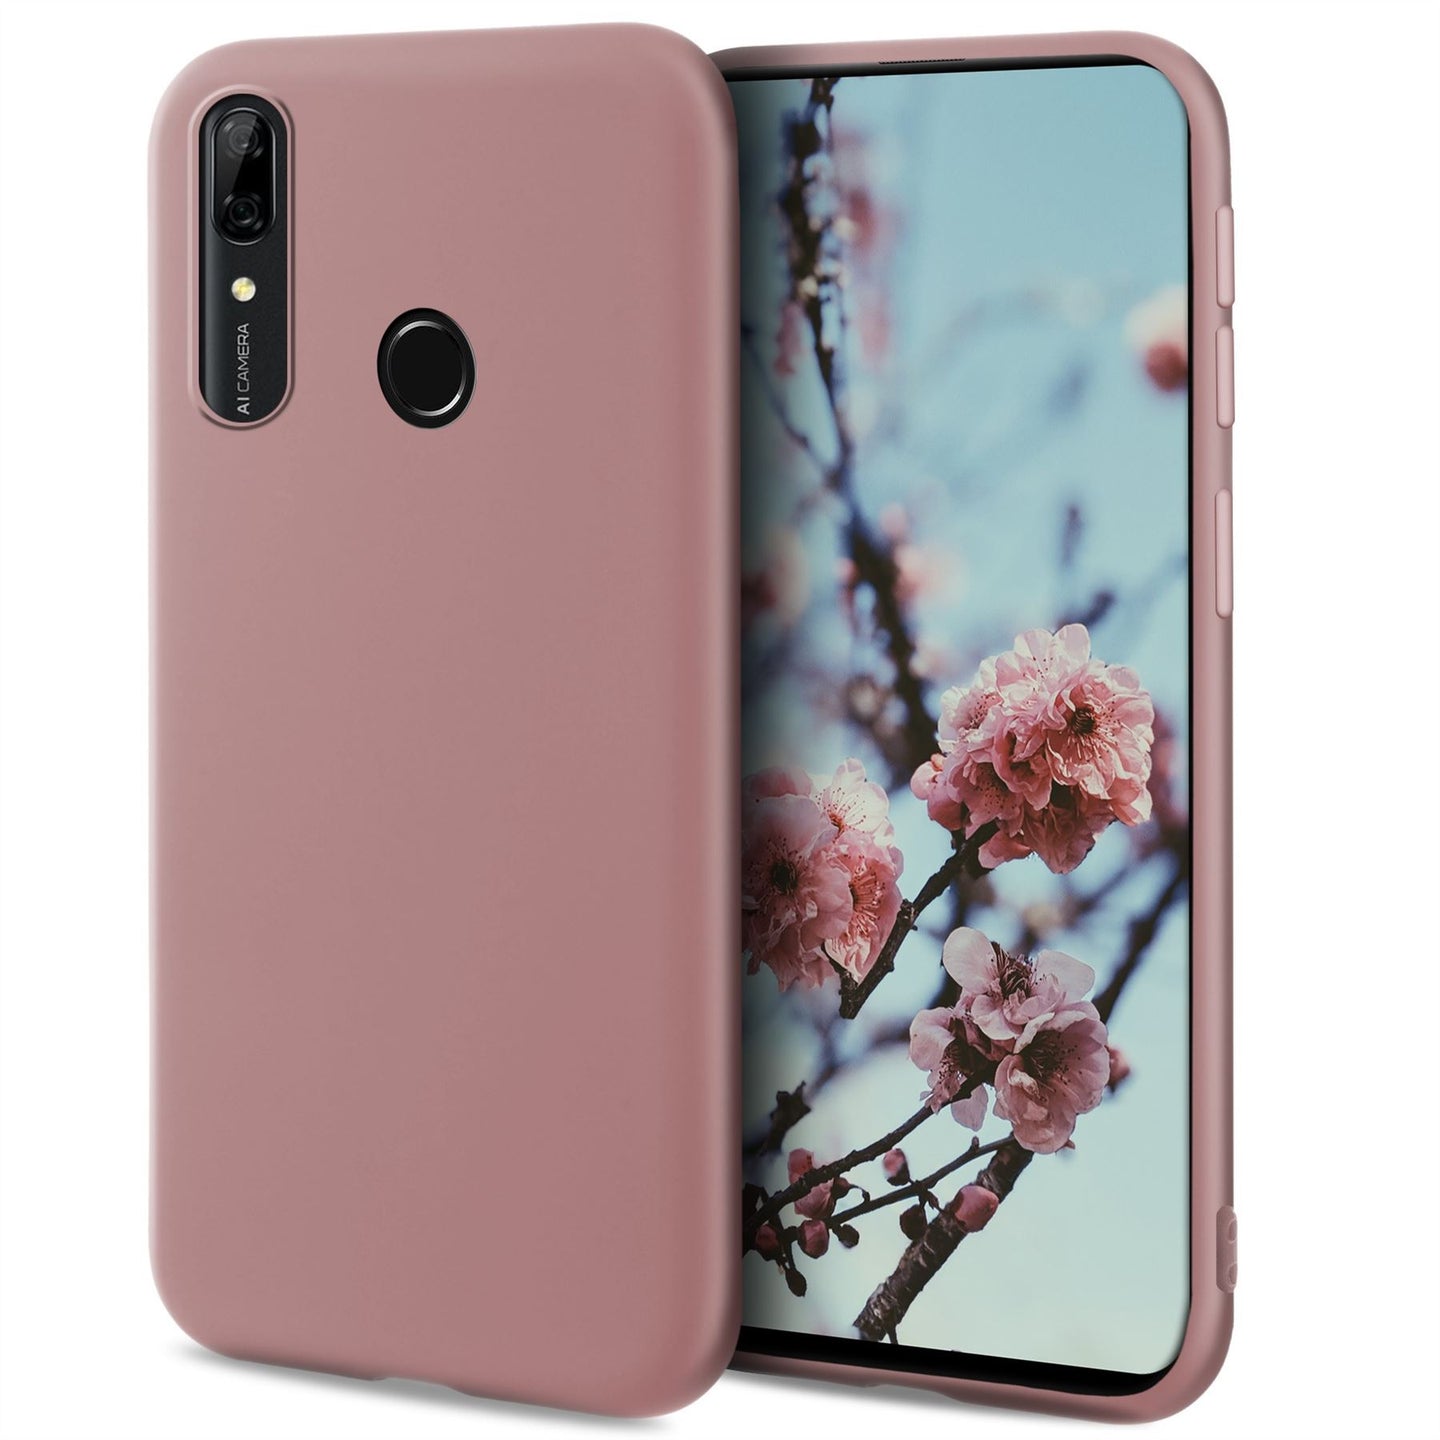 Moozy Minimalist Series Silicone Case for Huawei P Smart Z and Honor 9X, Rose Beige - Matte Finish Slim Soft TPU Cover